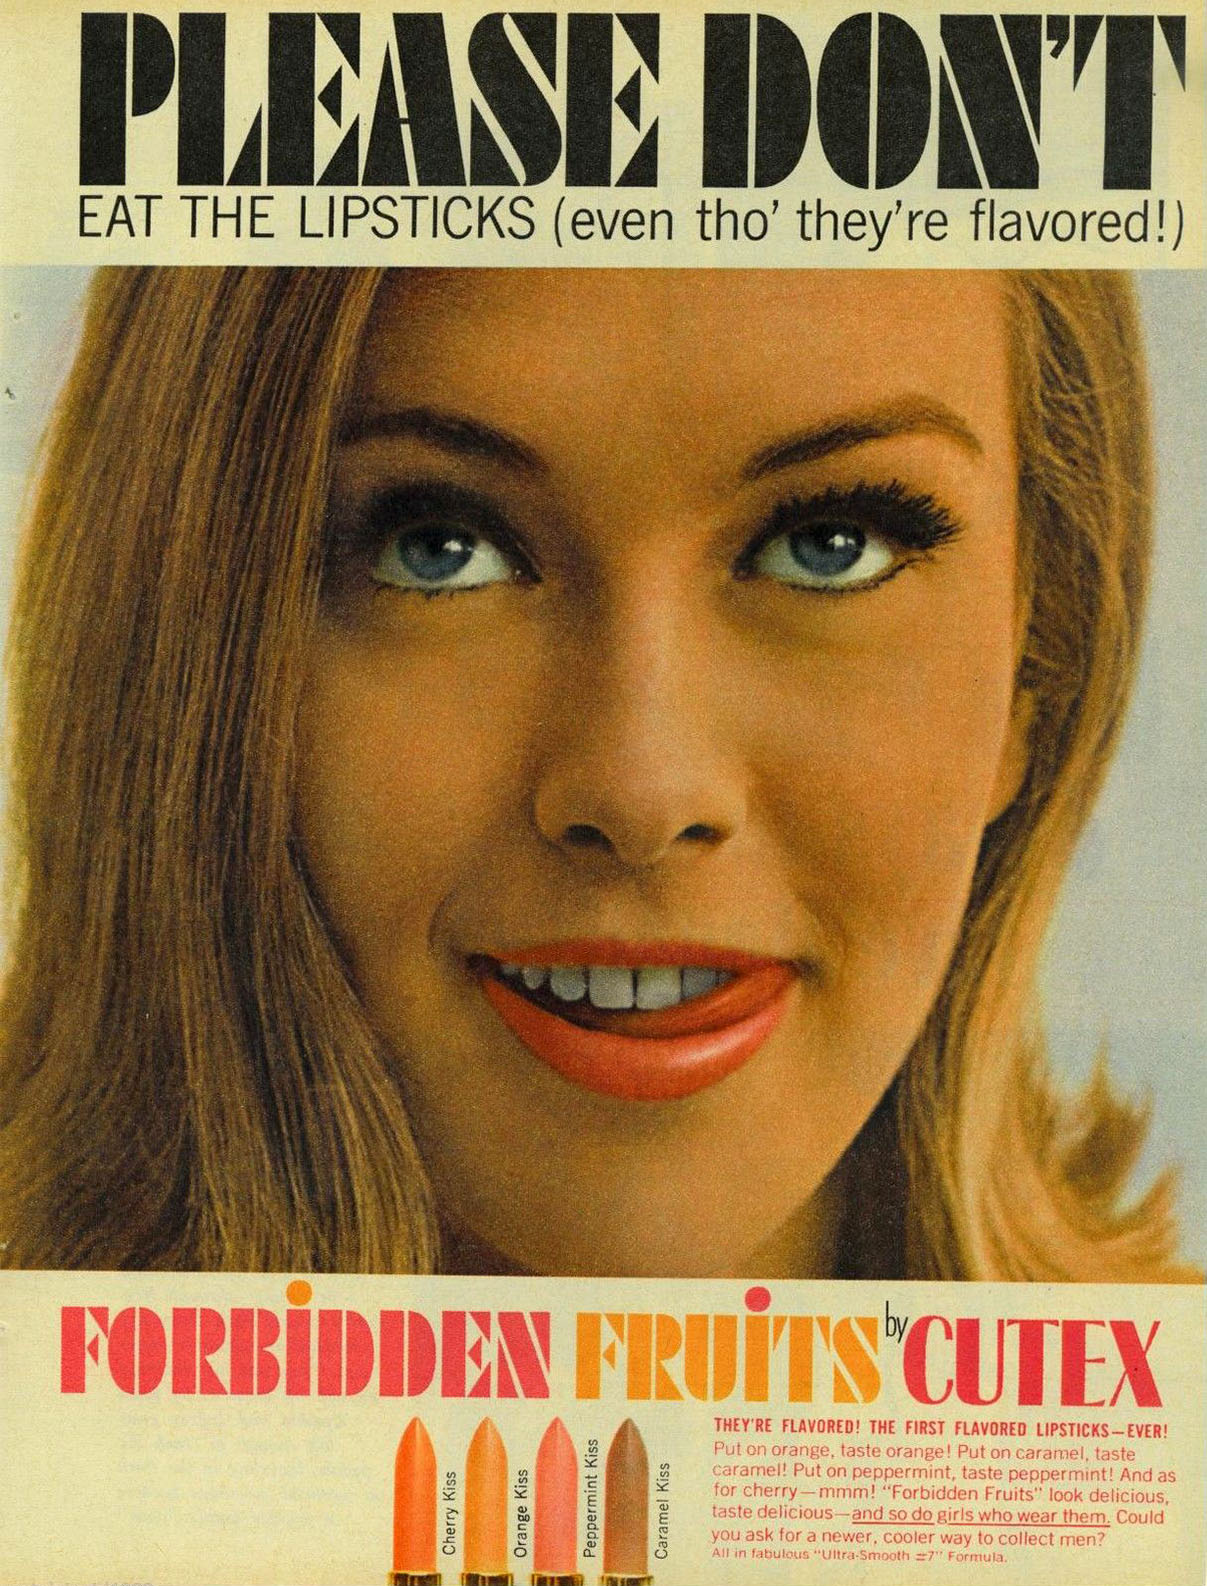 High-Gloss and Hot Pink: Lipstick Adverts from the 1960s-1980s - Flashbak